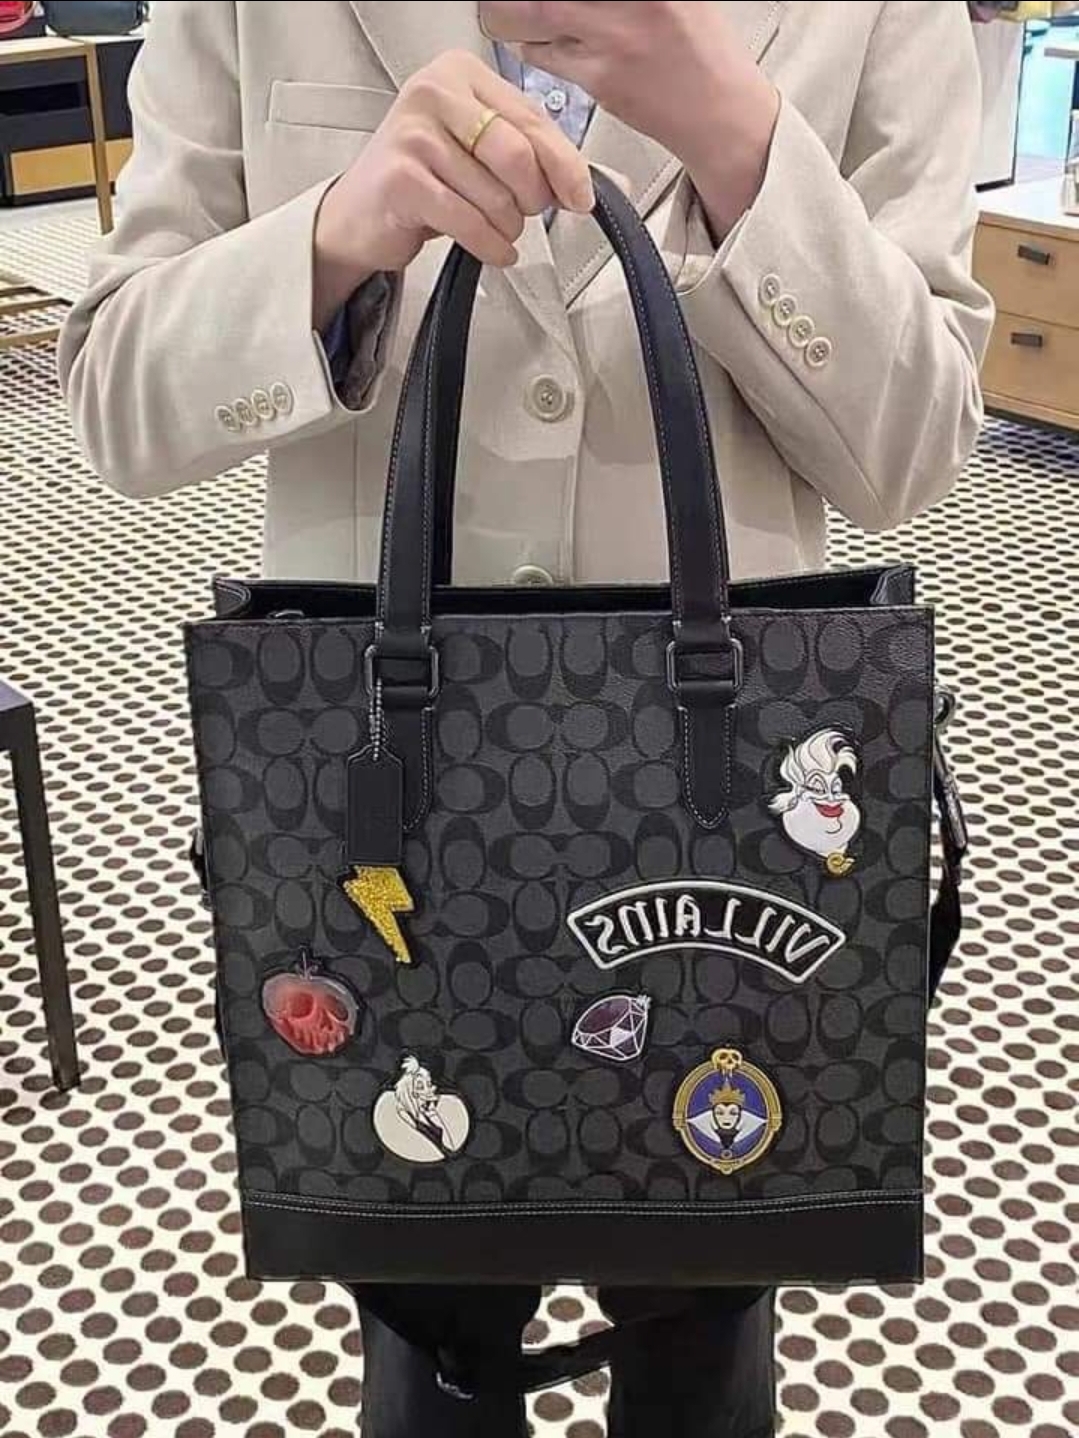 Coach Mickey Mouse Central Tote for Sale in Pasadena, TX - OfferUp